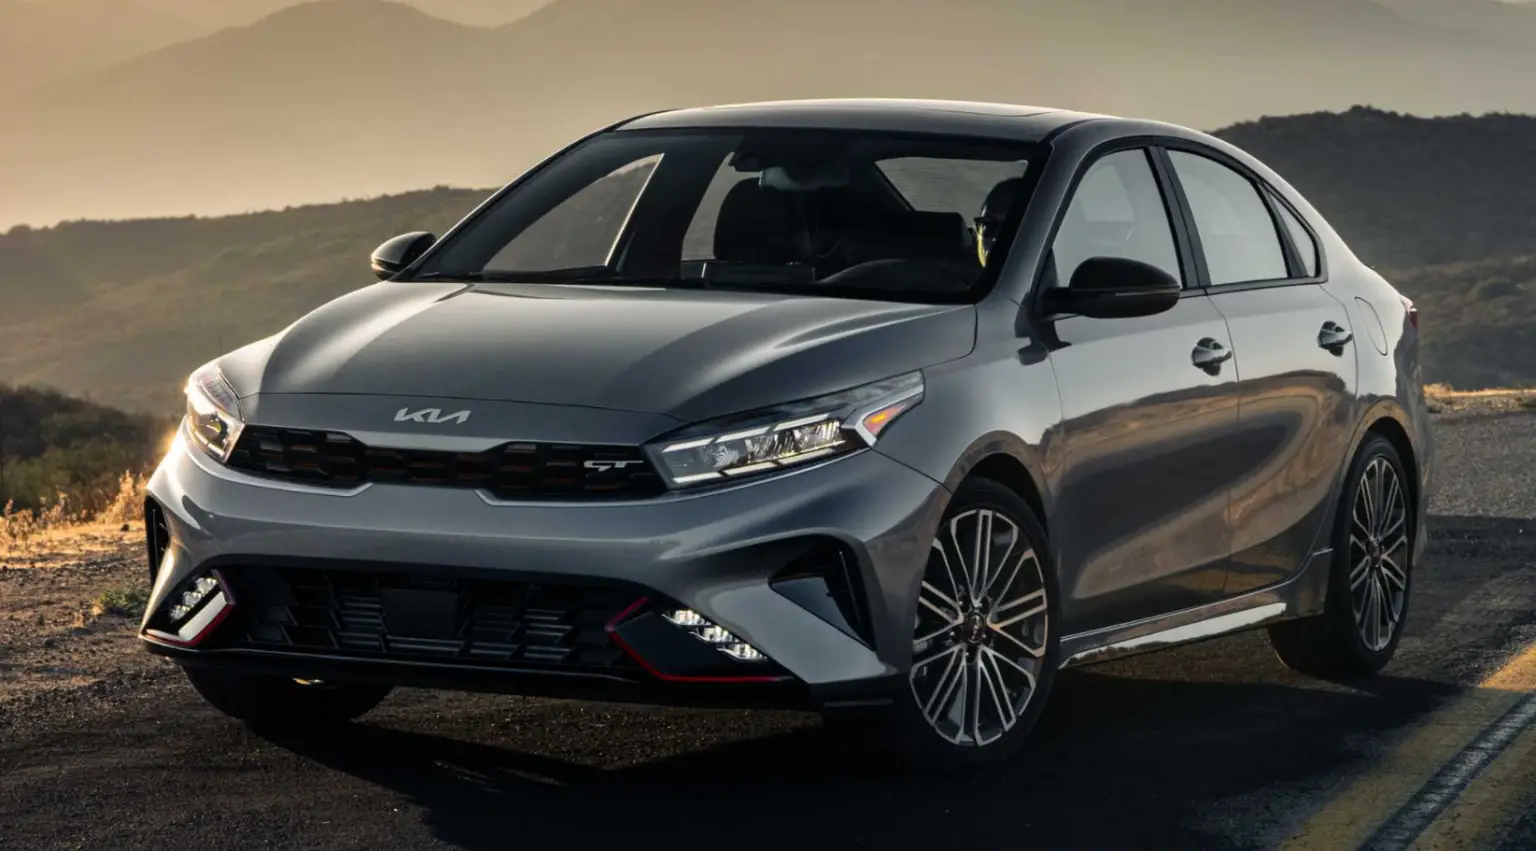 2024 Kia Forte Production after 2022